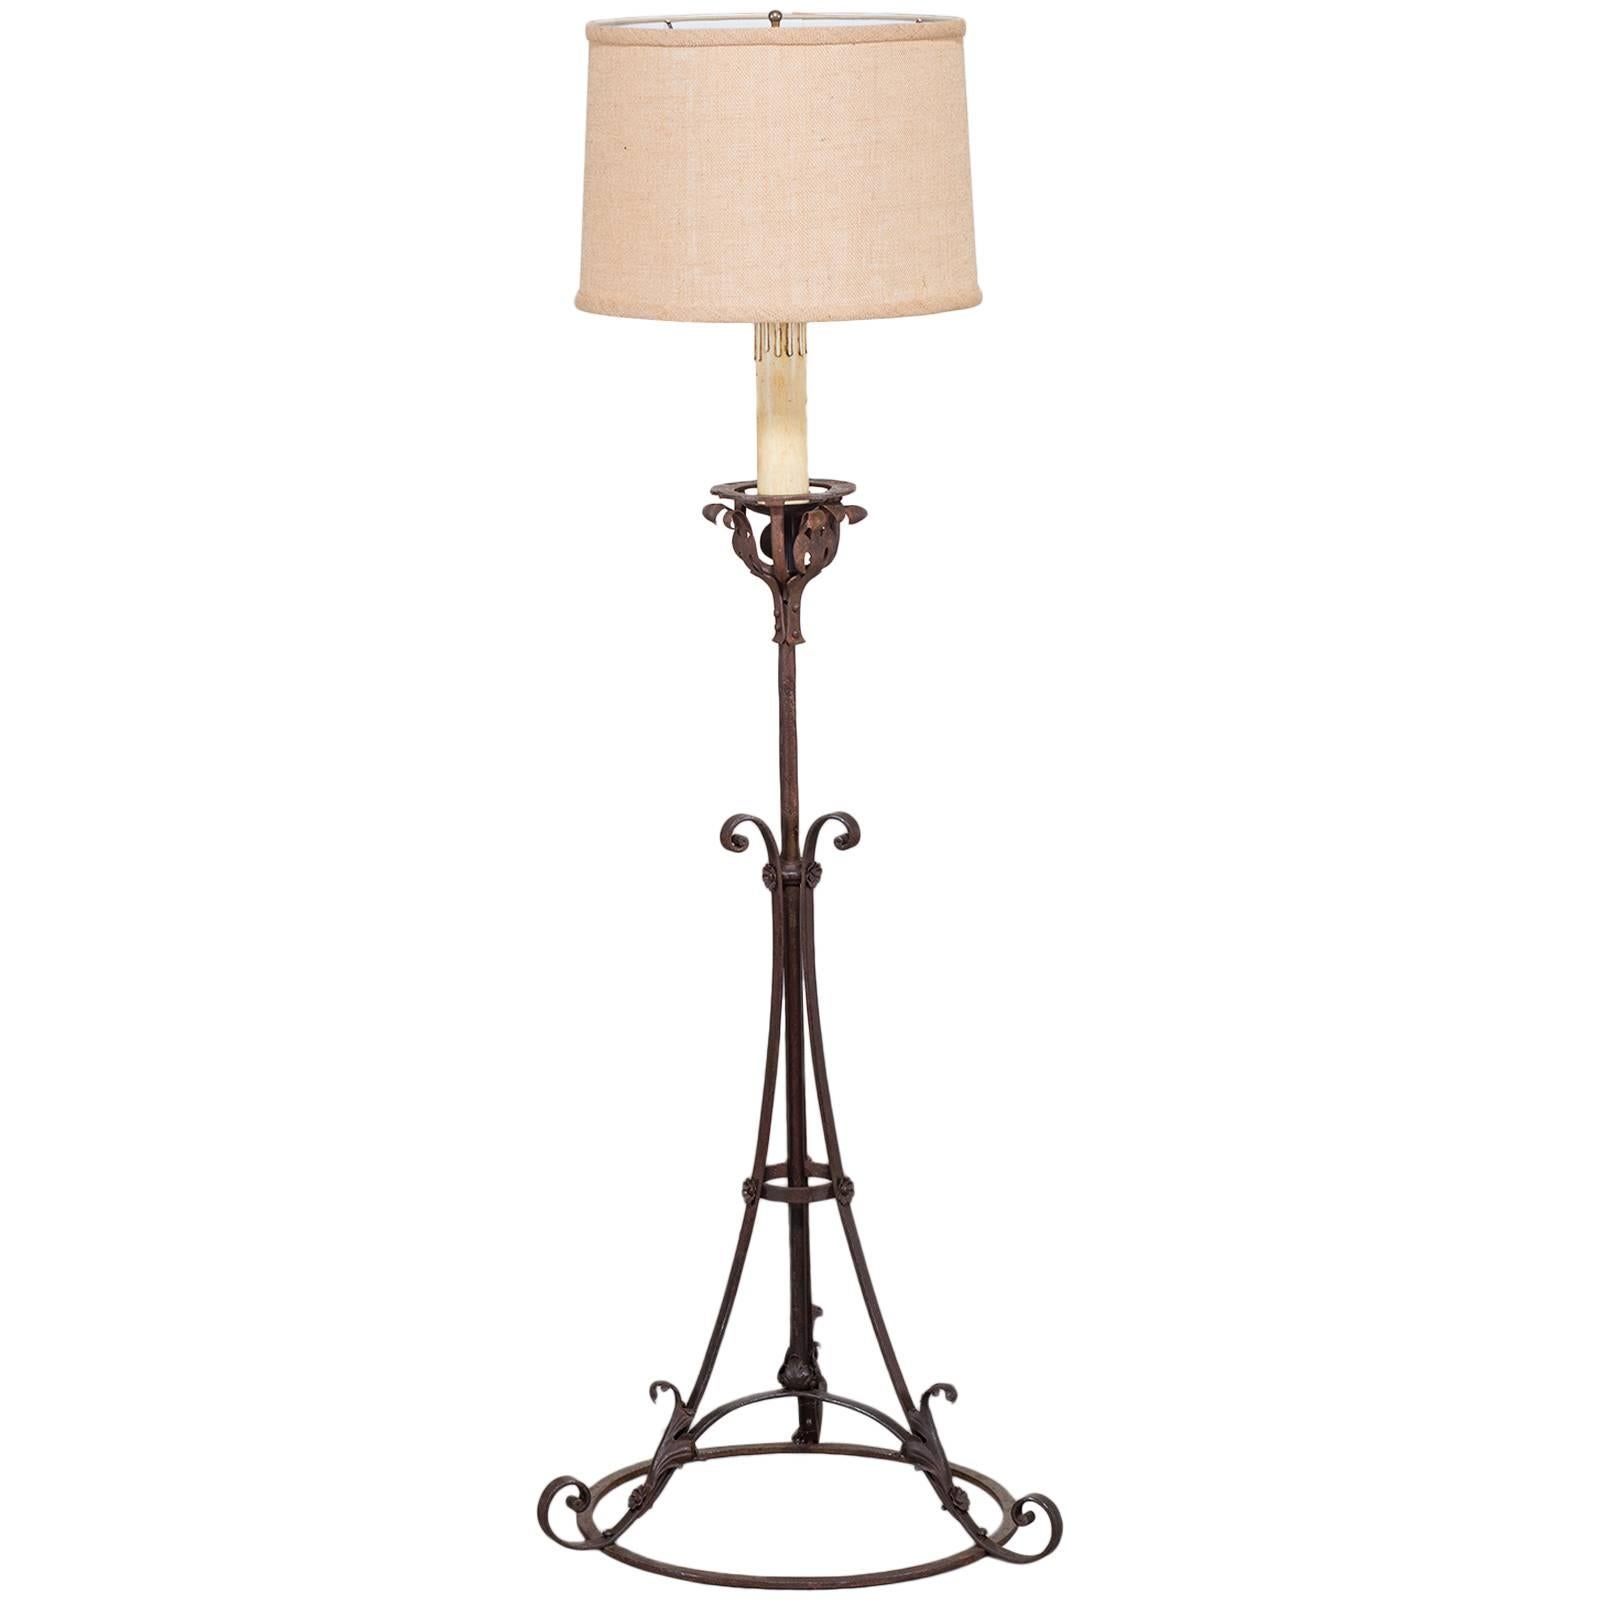 Antique French Forged Iron Candle Stand Floor Lamp, circa 1900 For Sale